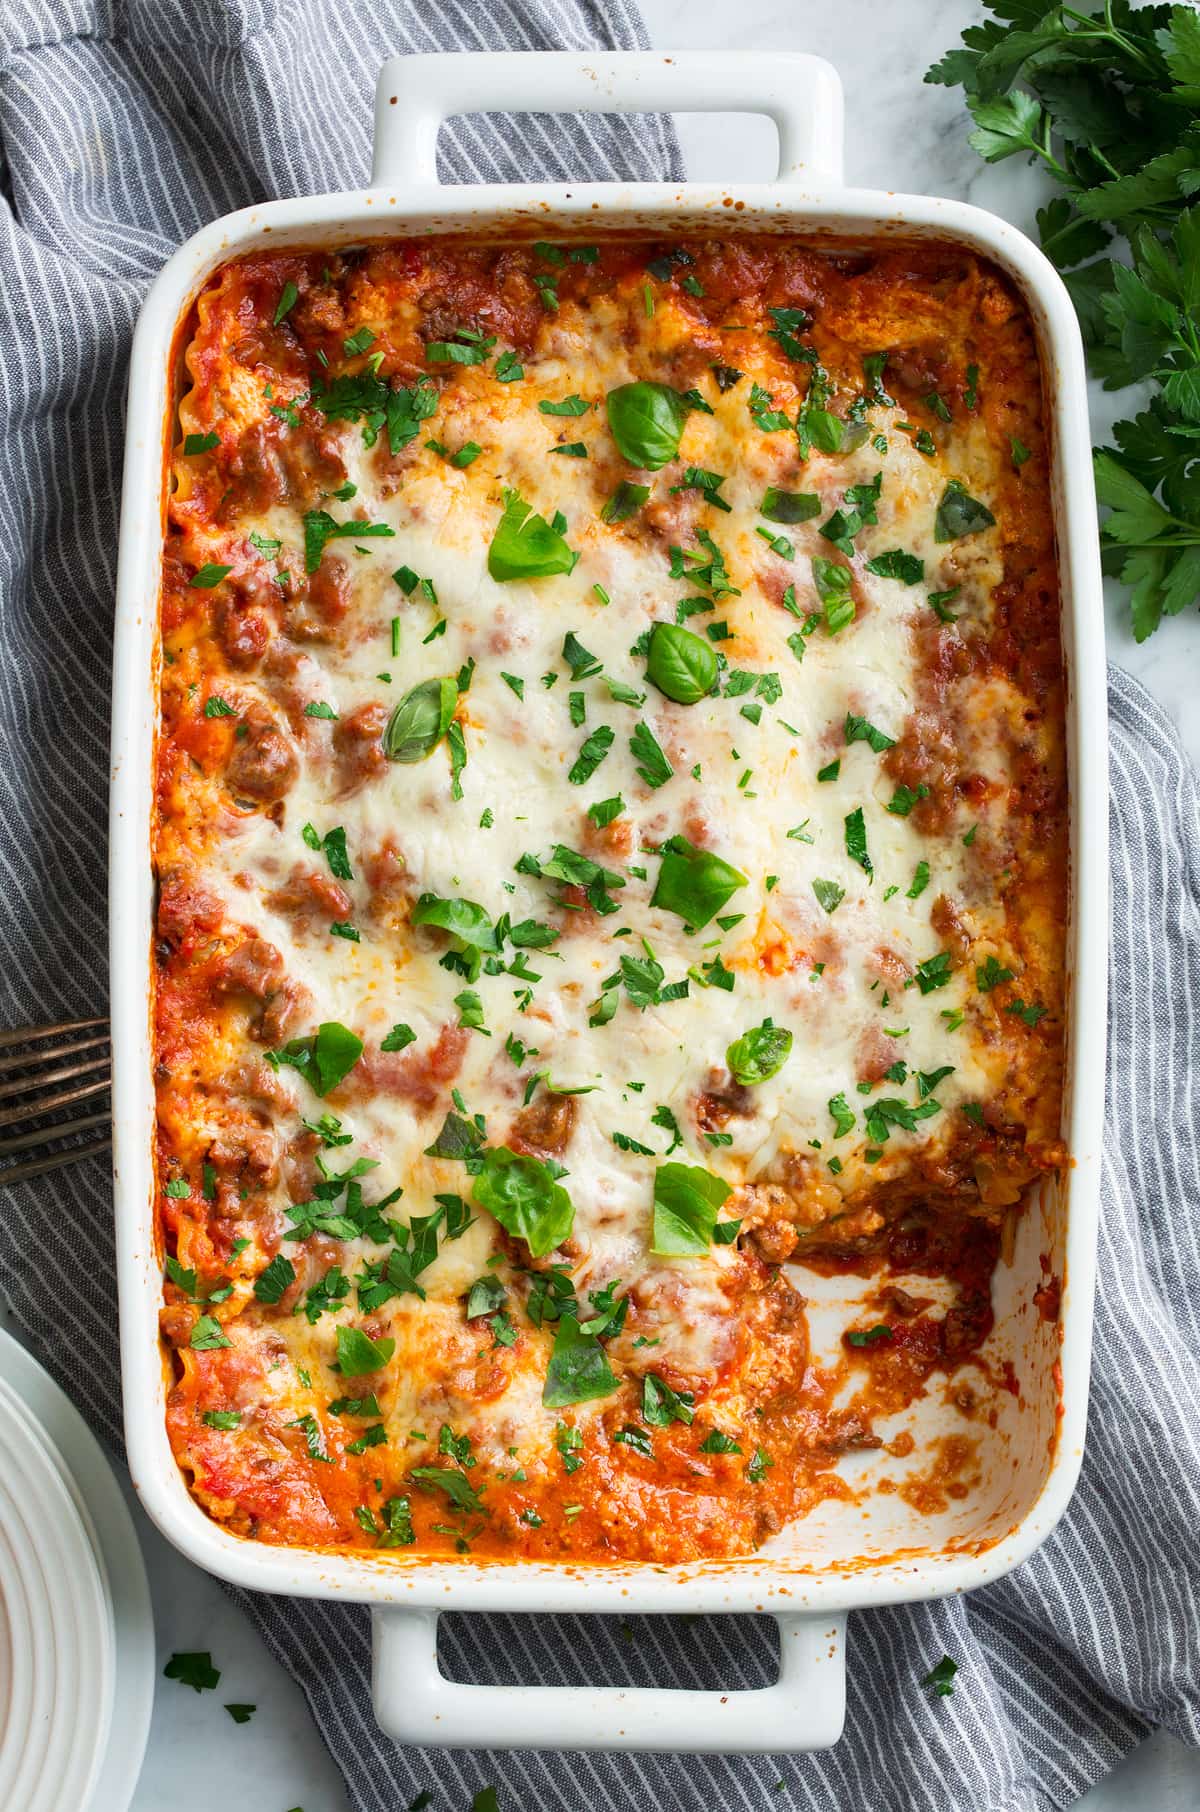 Easy lasagna shown overhead in a white casserole dish with one portion cut out.